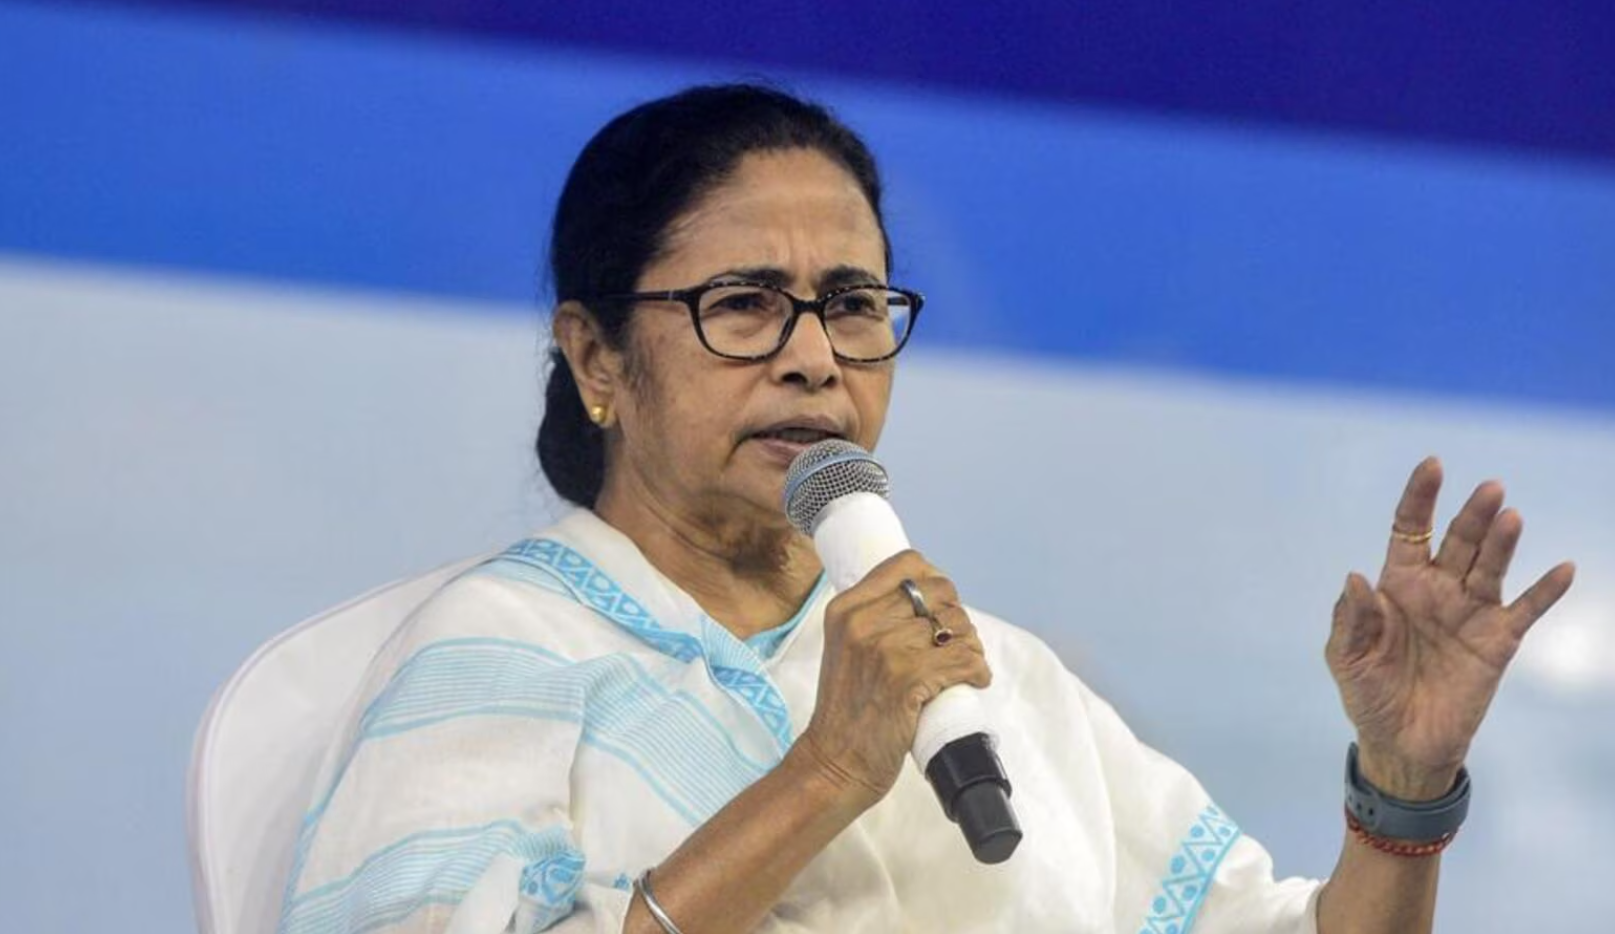 Hindus in no way will benefit from UCC: Mamata